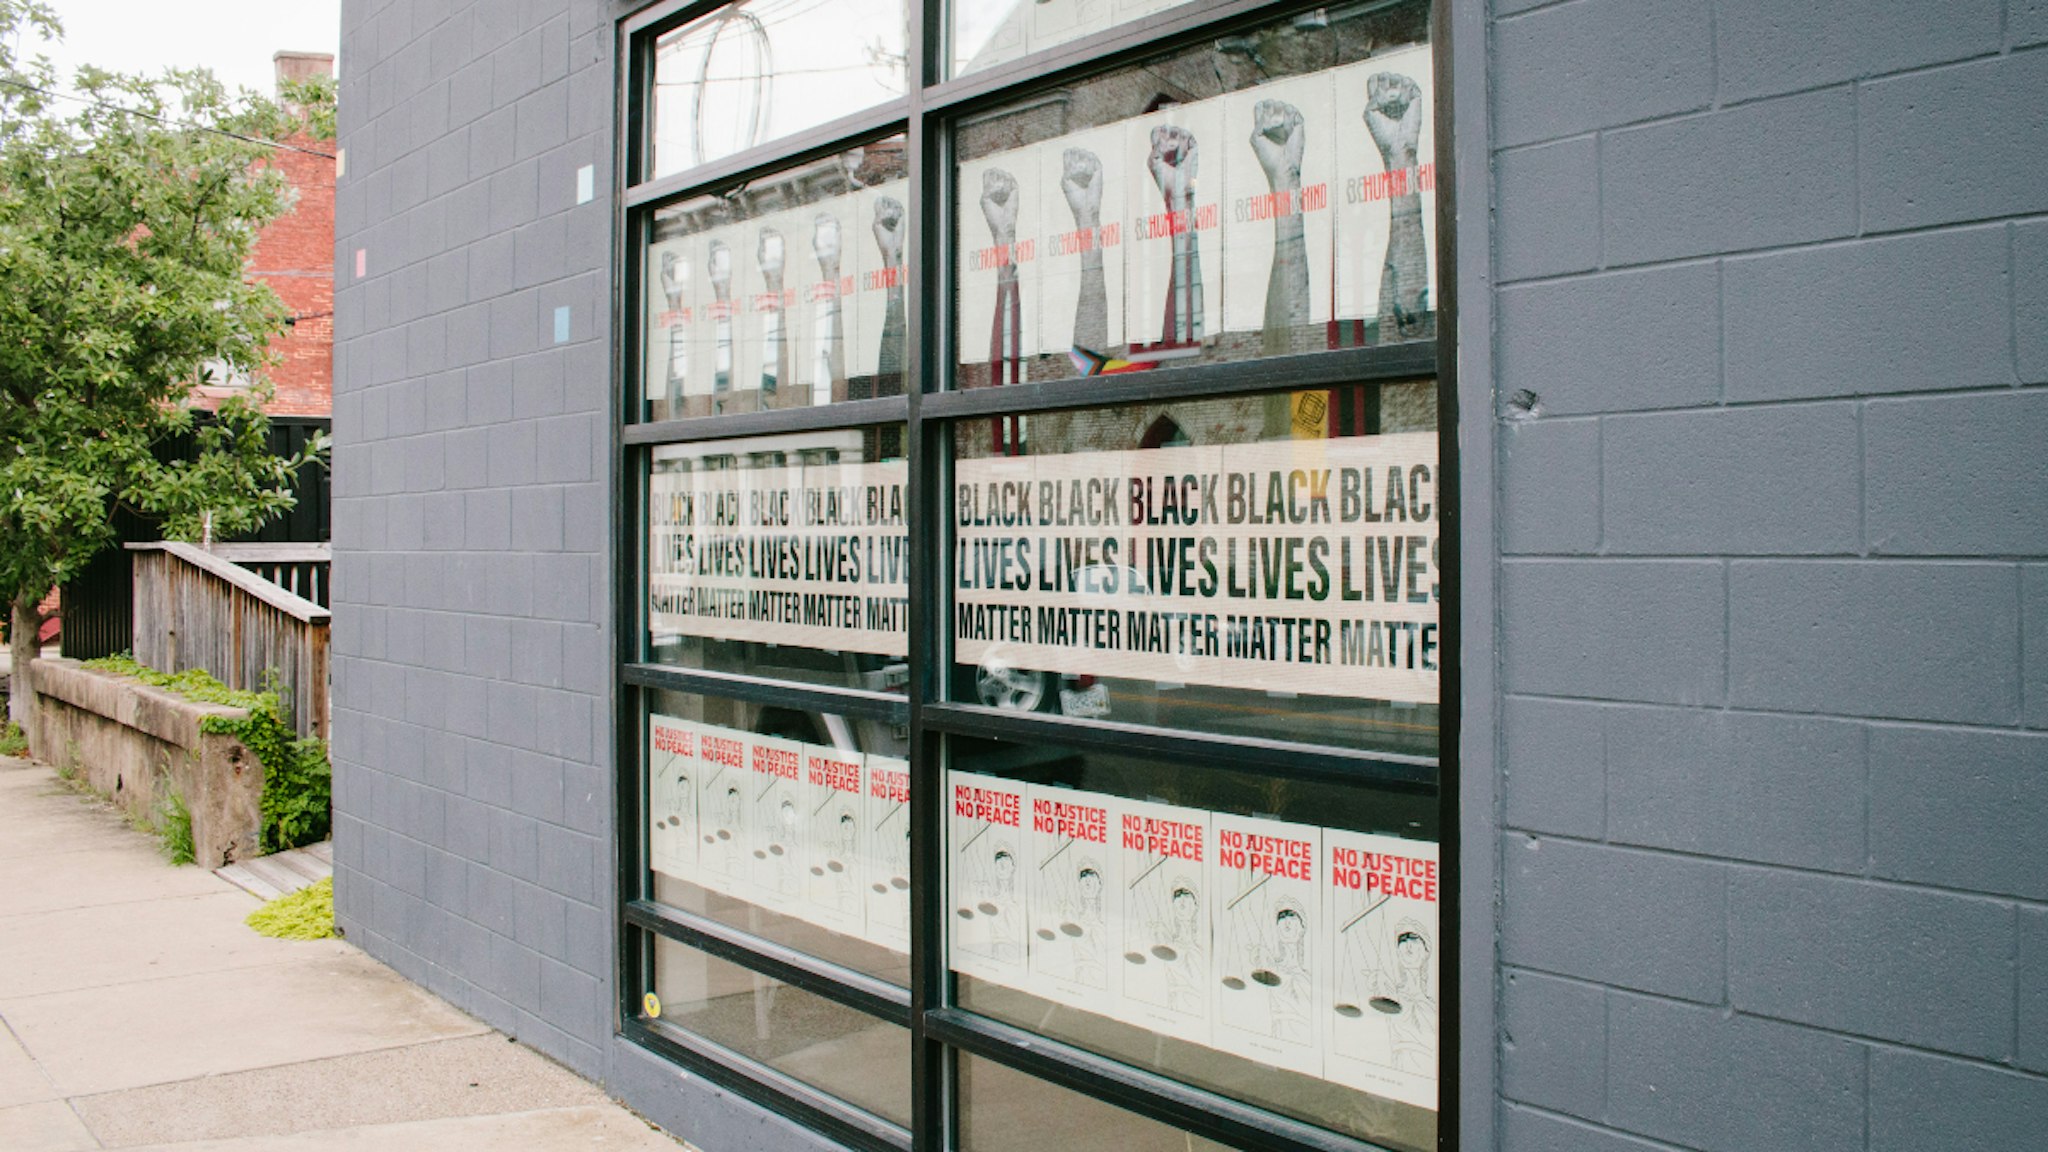 Black Lives Matter signs are displayed in the window of a business in the East Market District (also referred to as NuLu neighborhood) in Louisville,